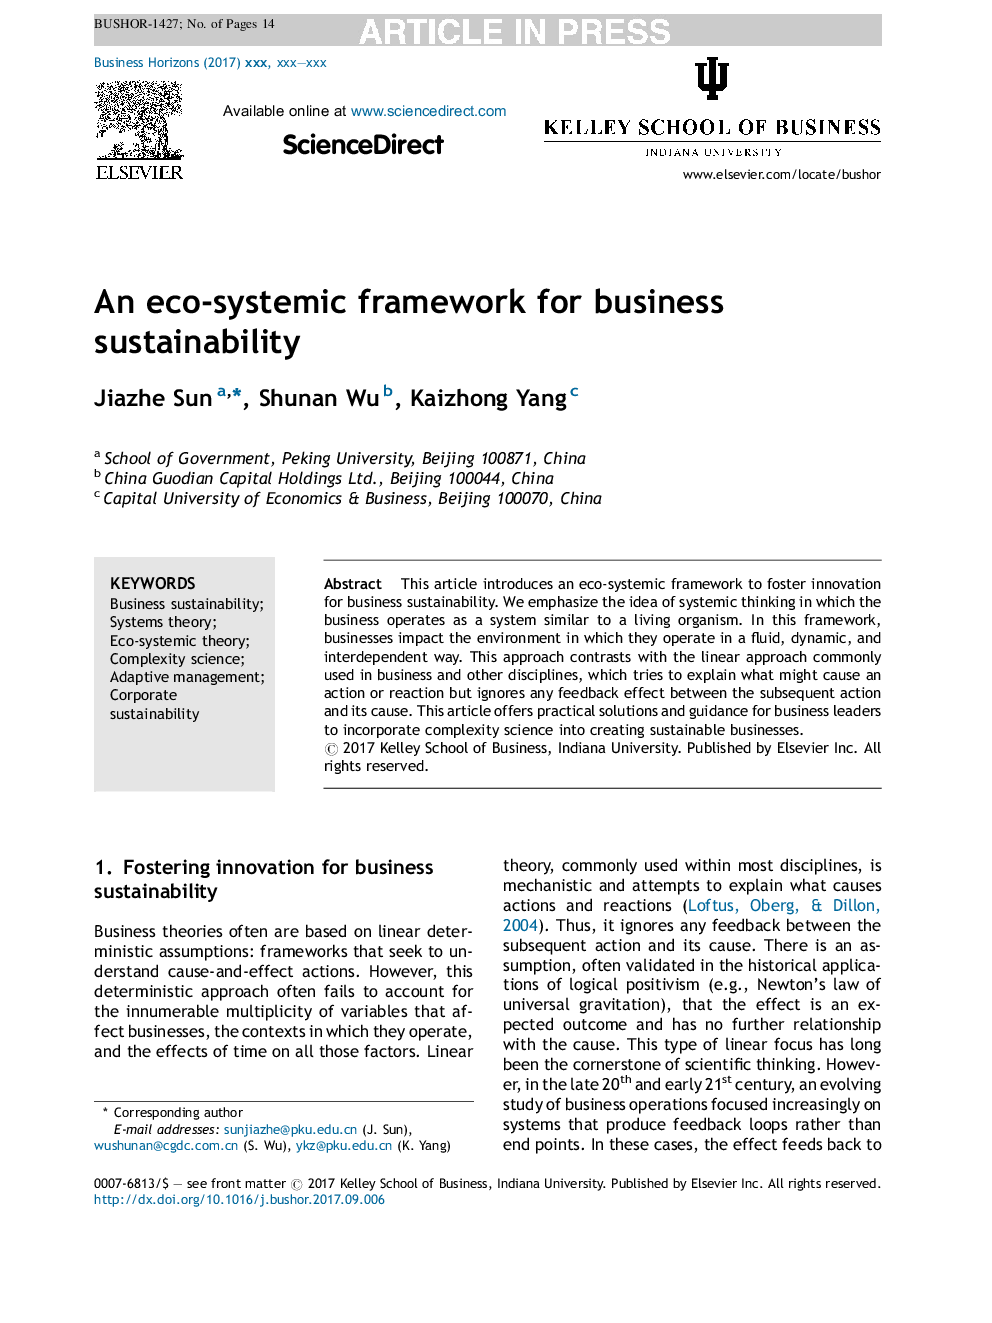 An ecosystemic framework for business sustainability